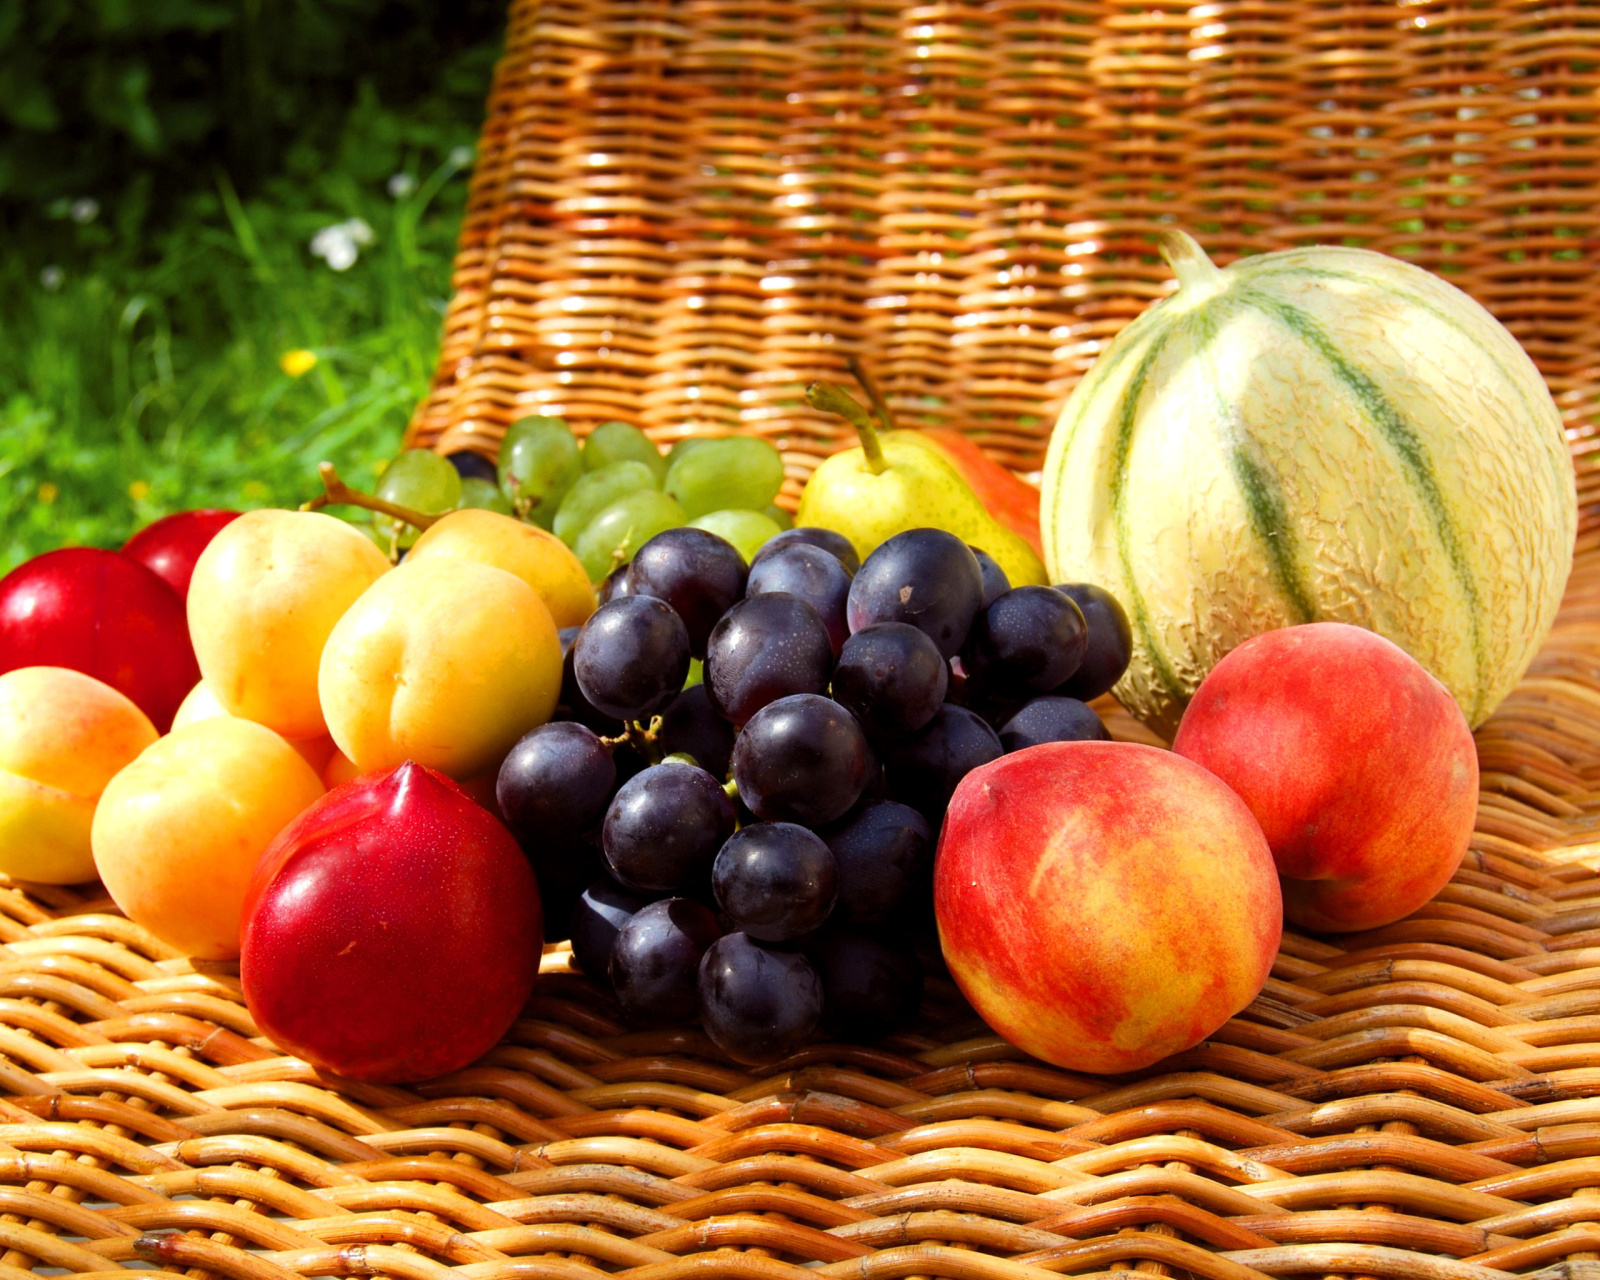 Melons, apricots, peaches, nectarines, grapes, pear screenshot #1 1600x1280